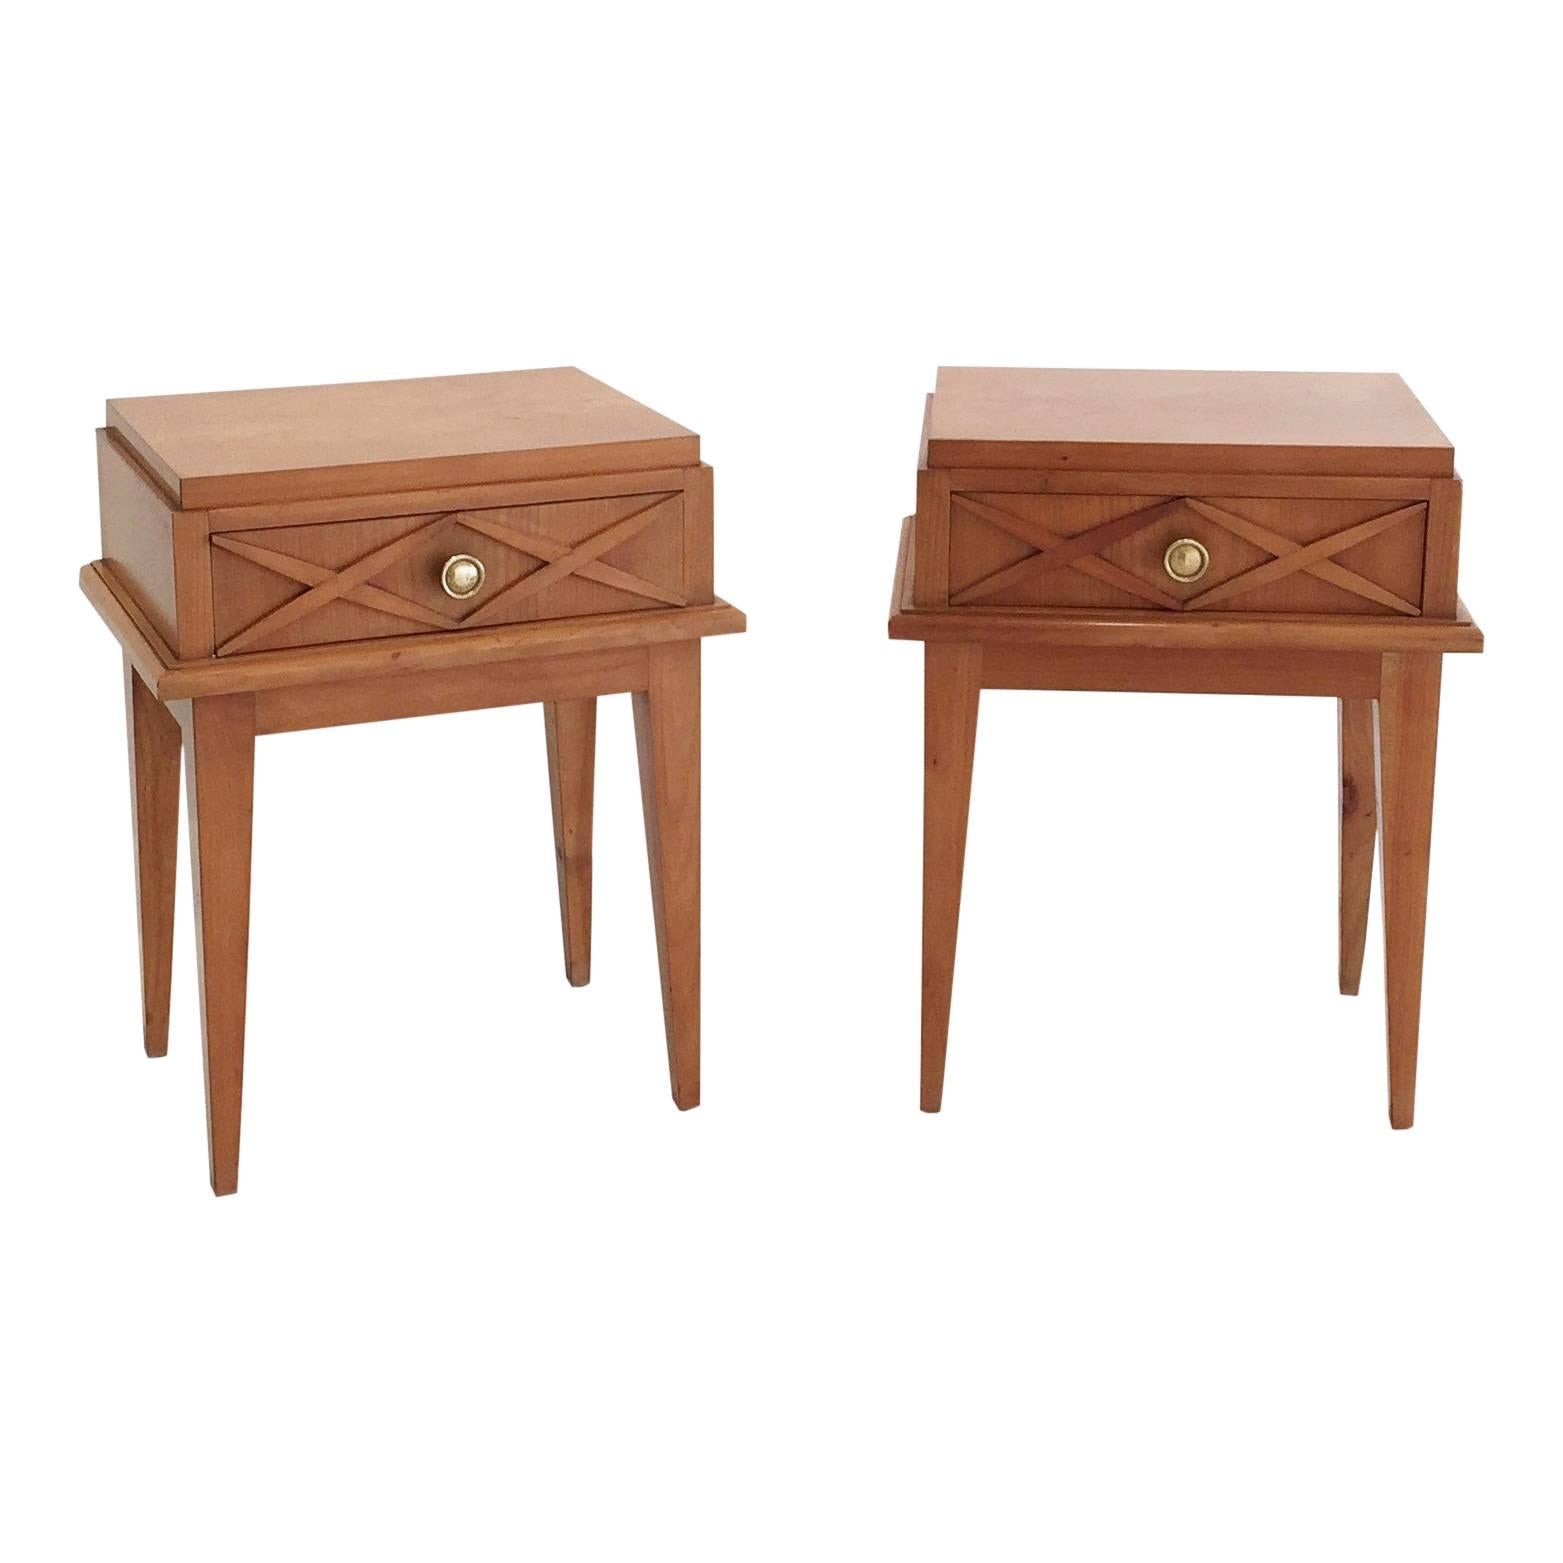 One-drawer pair of croisillon nightstands, in the style of Arbus, Maison Gouffe.
Good overall vintage condition; minor surface scratches.
Inside compartments covered with decorative vinyl that should be removed
brass handles.